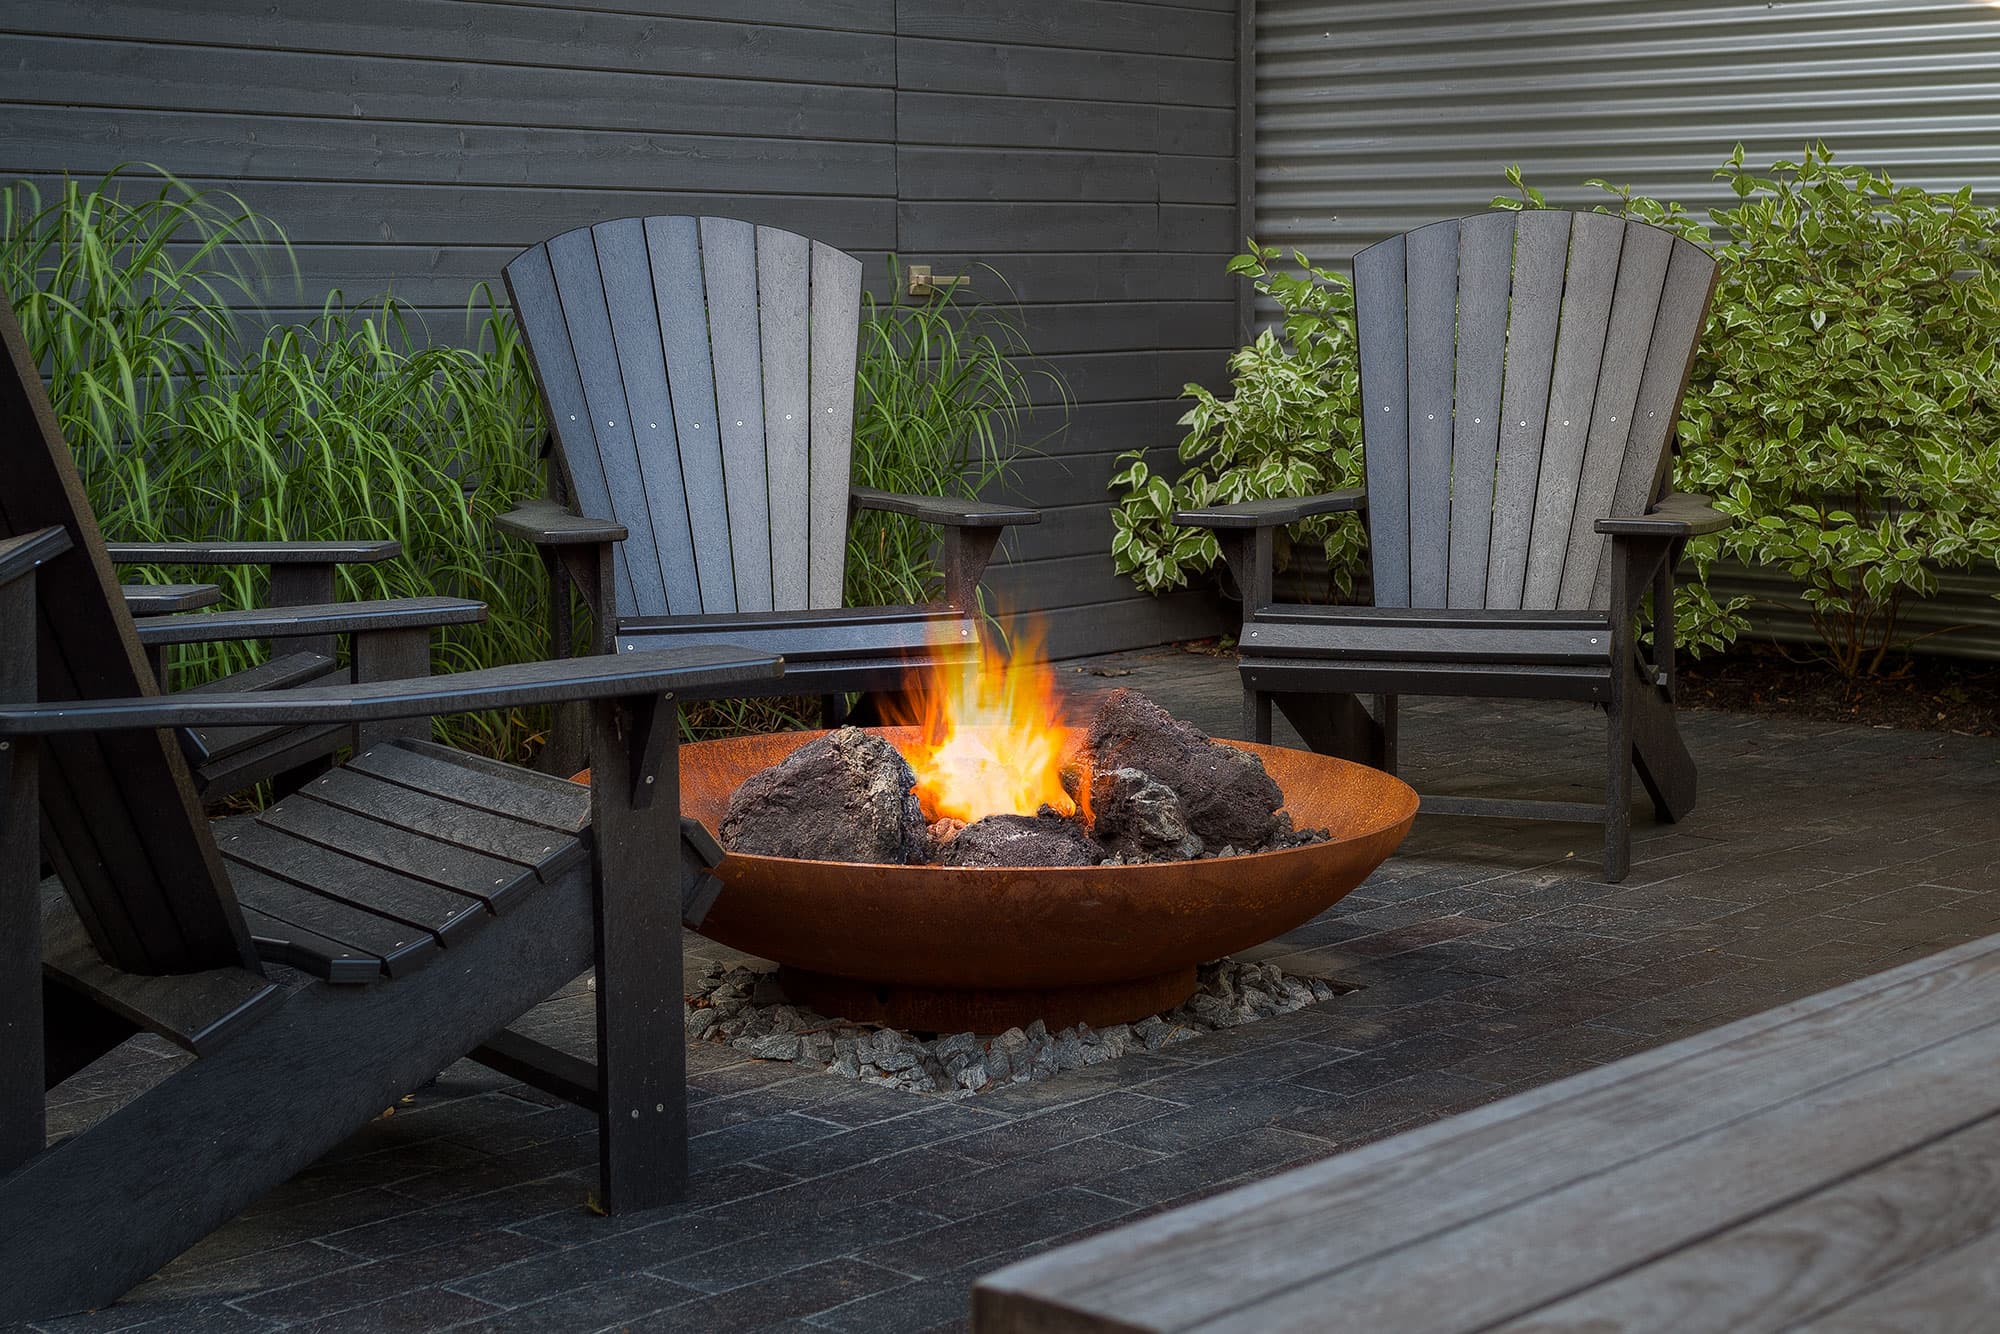 Modern Fire Pits – Ignition Systems: Manual, Match-lit and Electronic